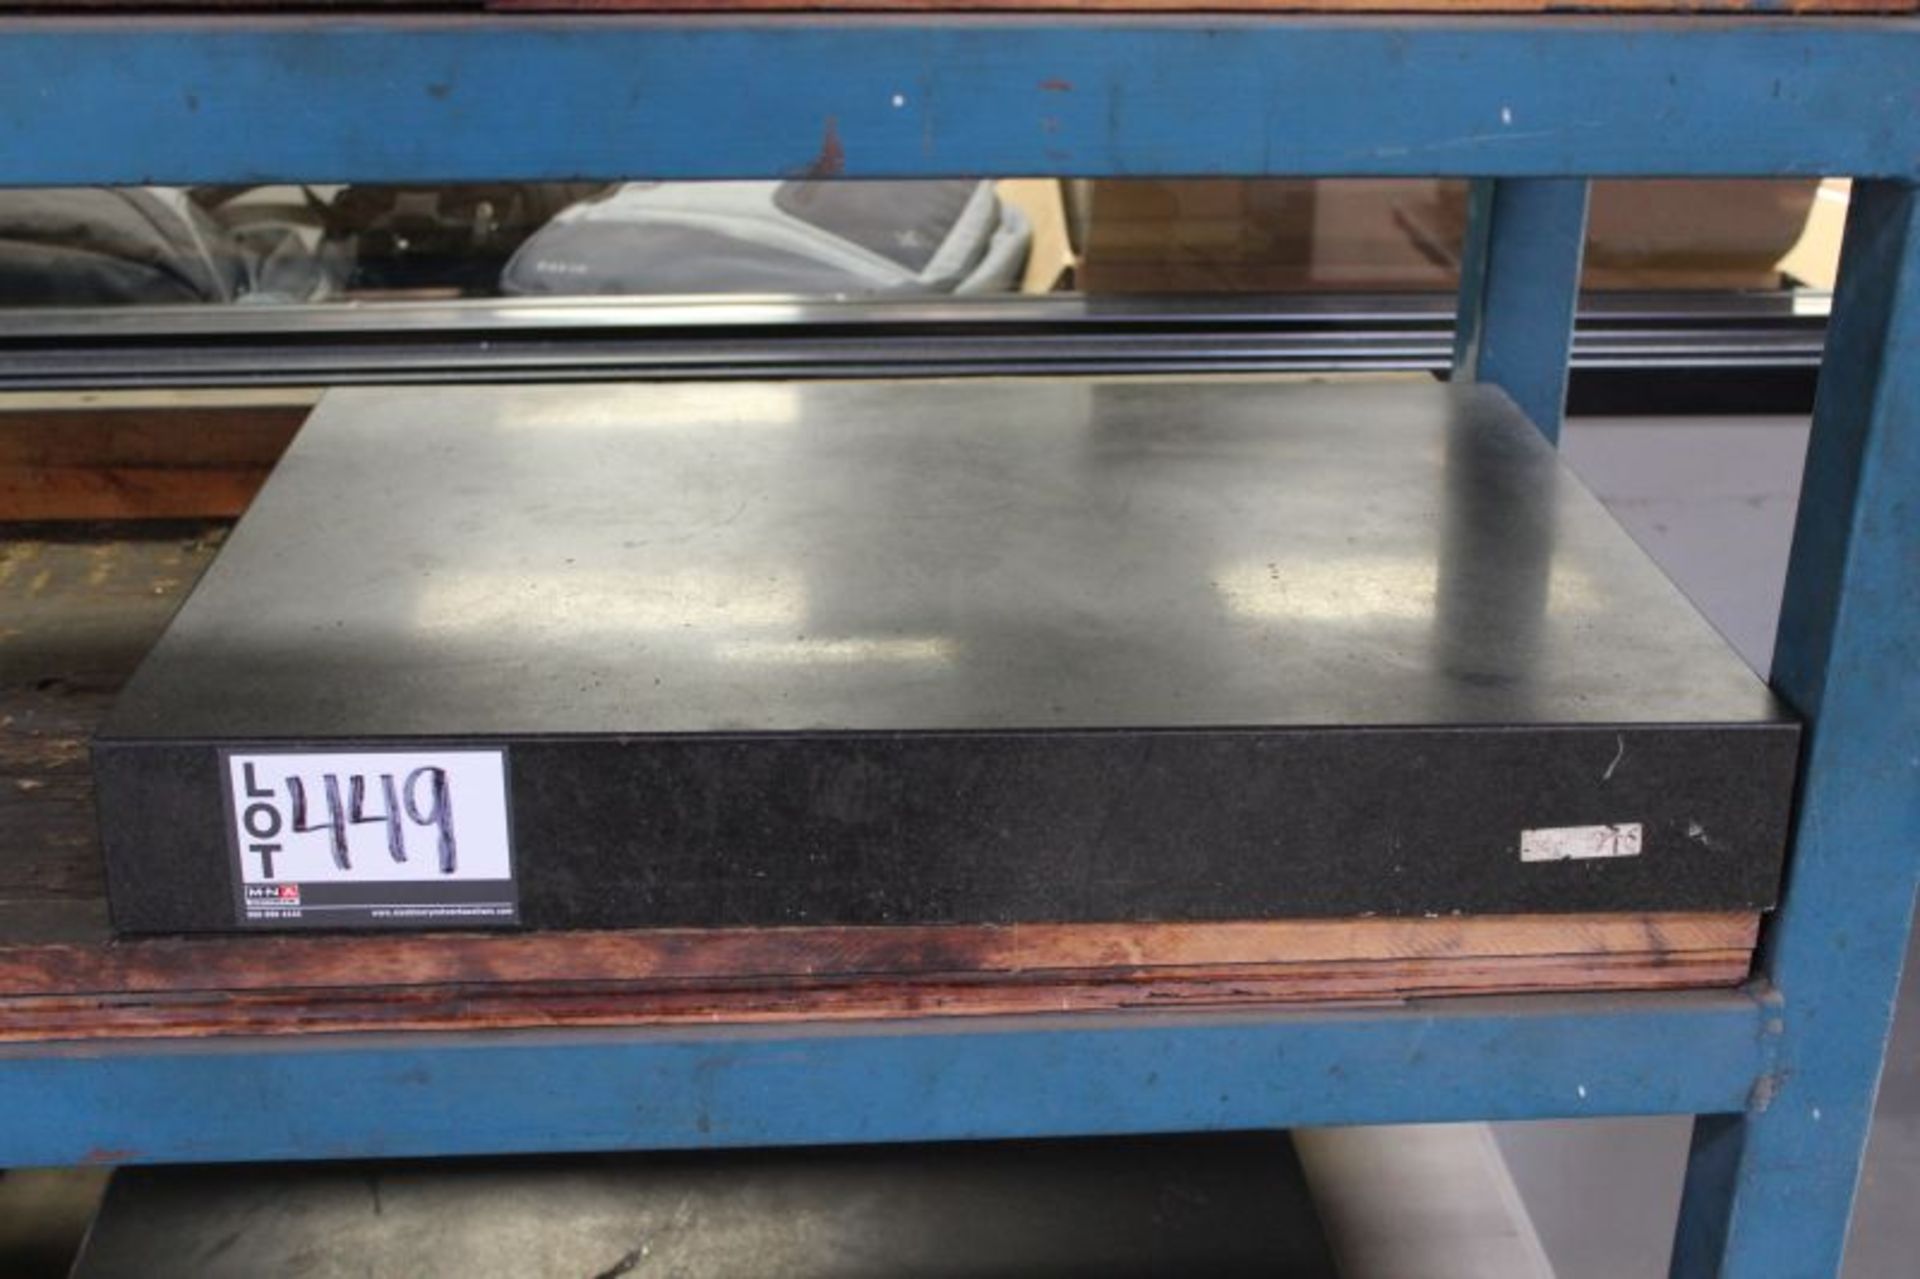 24" x 18" x 3" Surface Plate